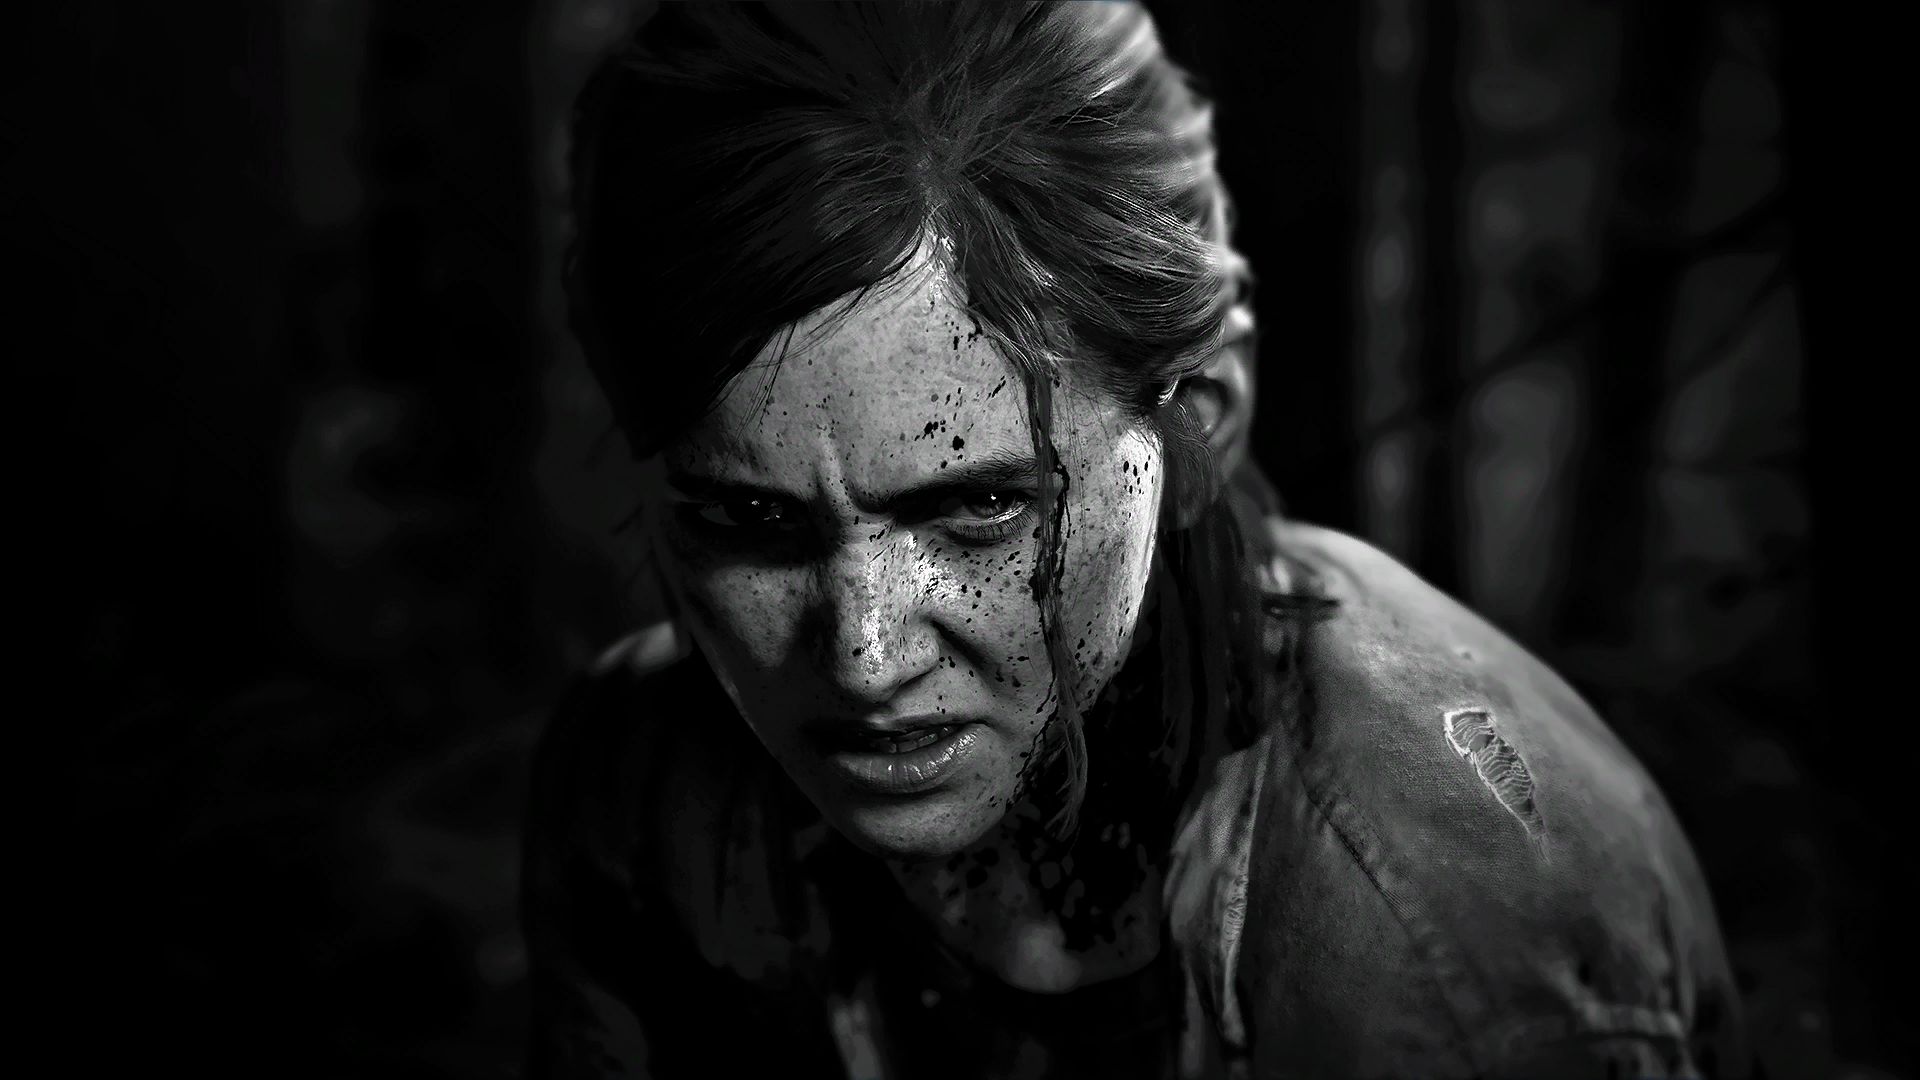 HD desktop wallpaper: Video Game, Ellie (The Last Of Us), The Last Of Us  Part Ii download free picture #1025365